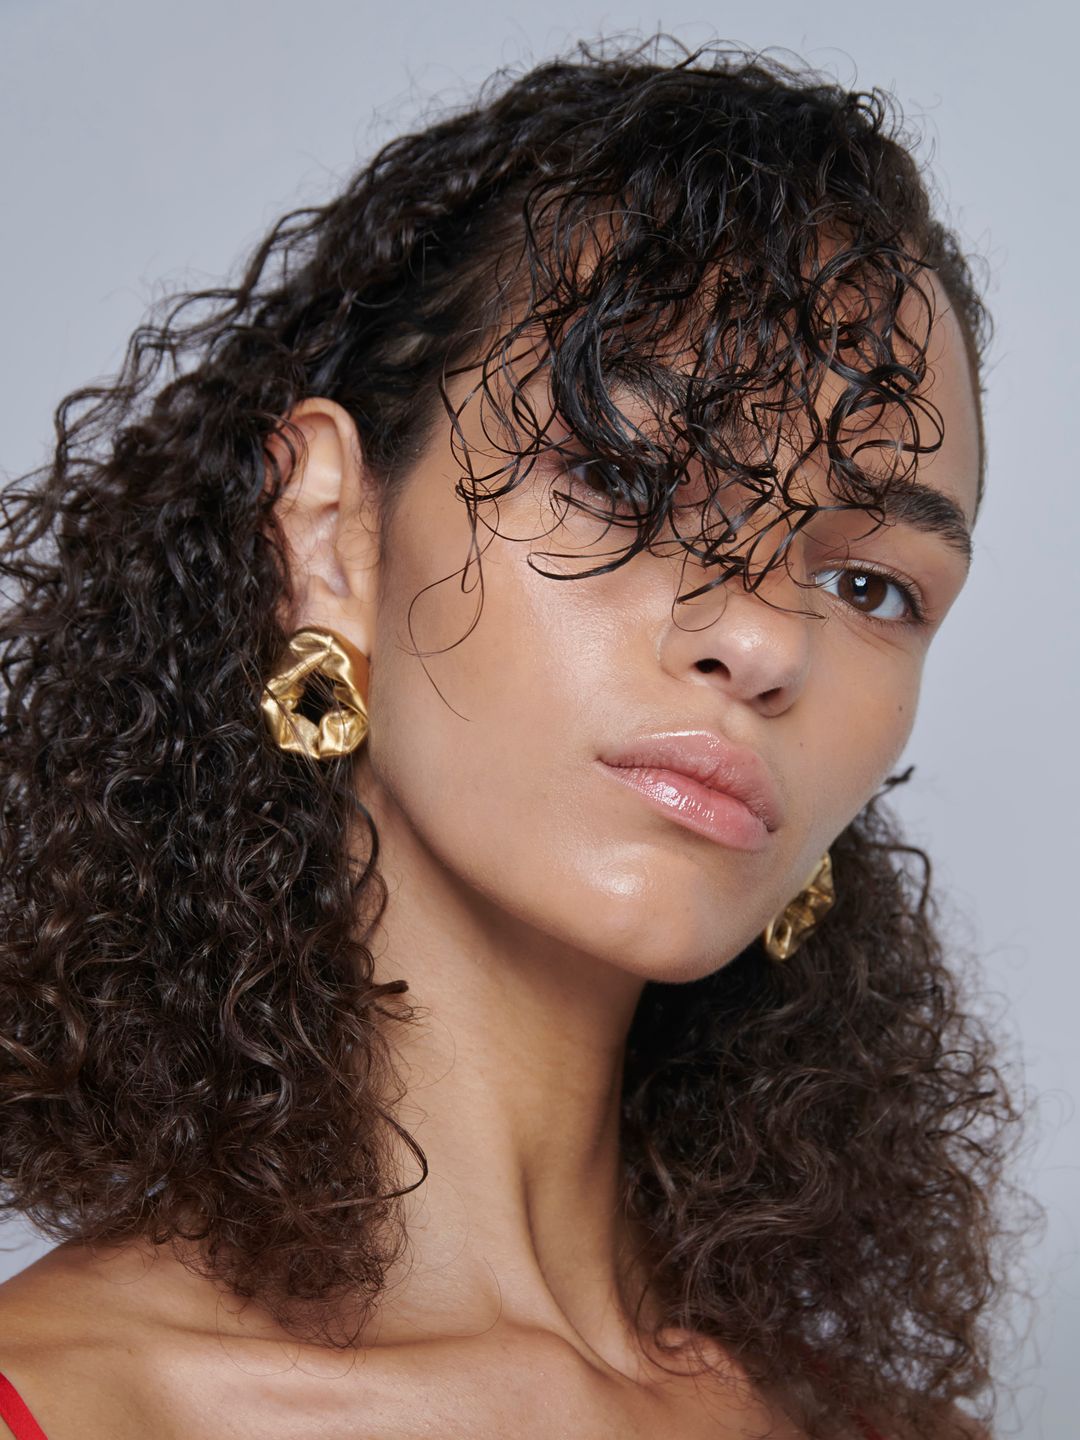 Model with curly hair 